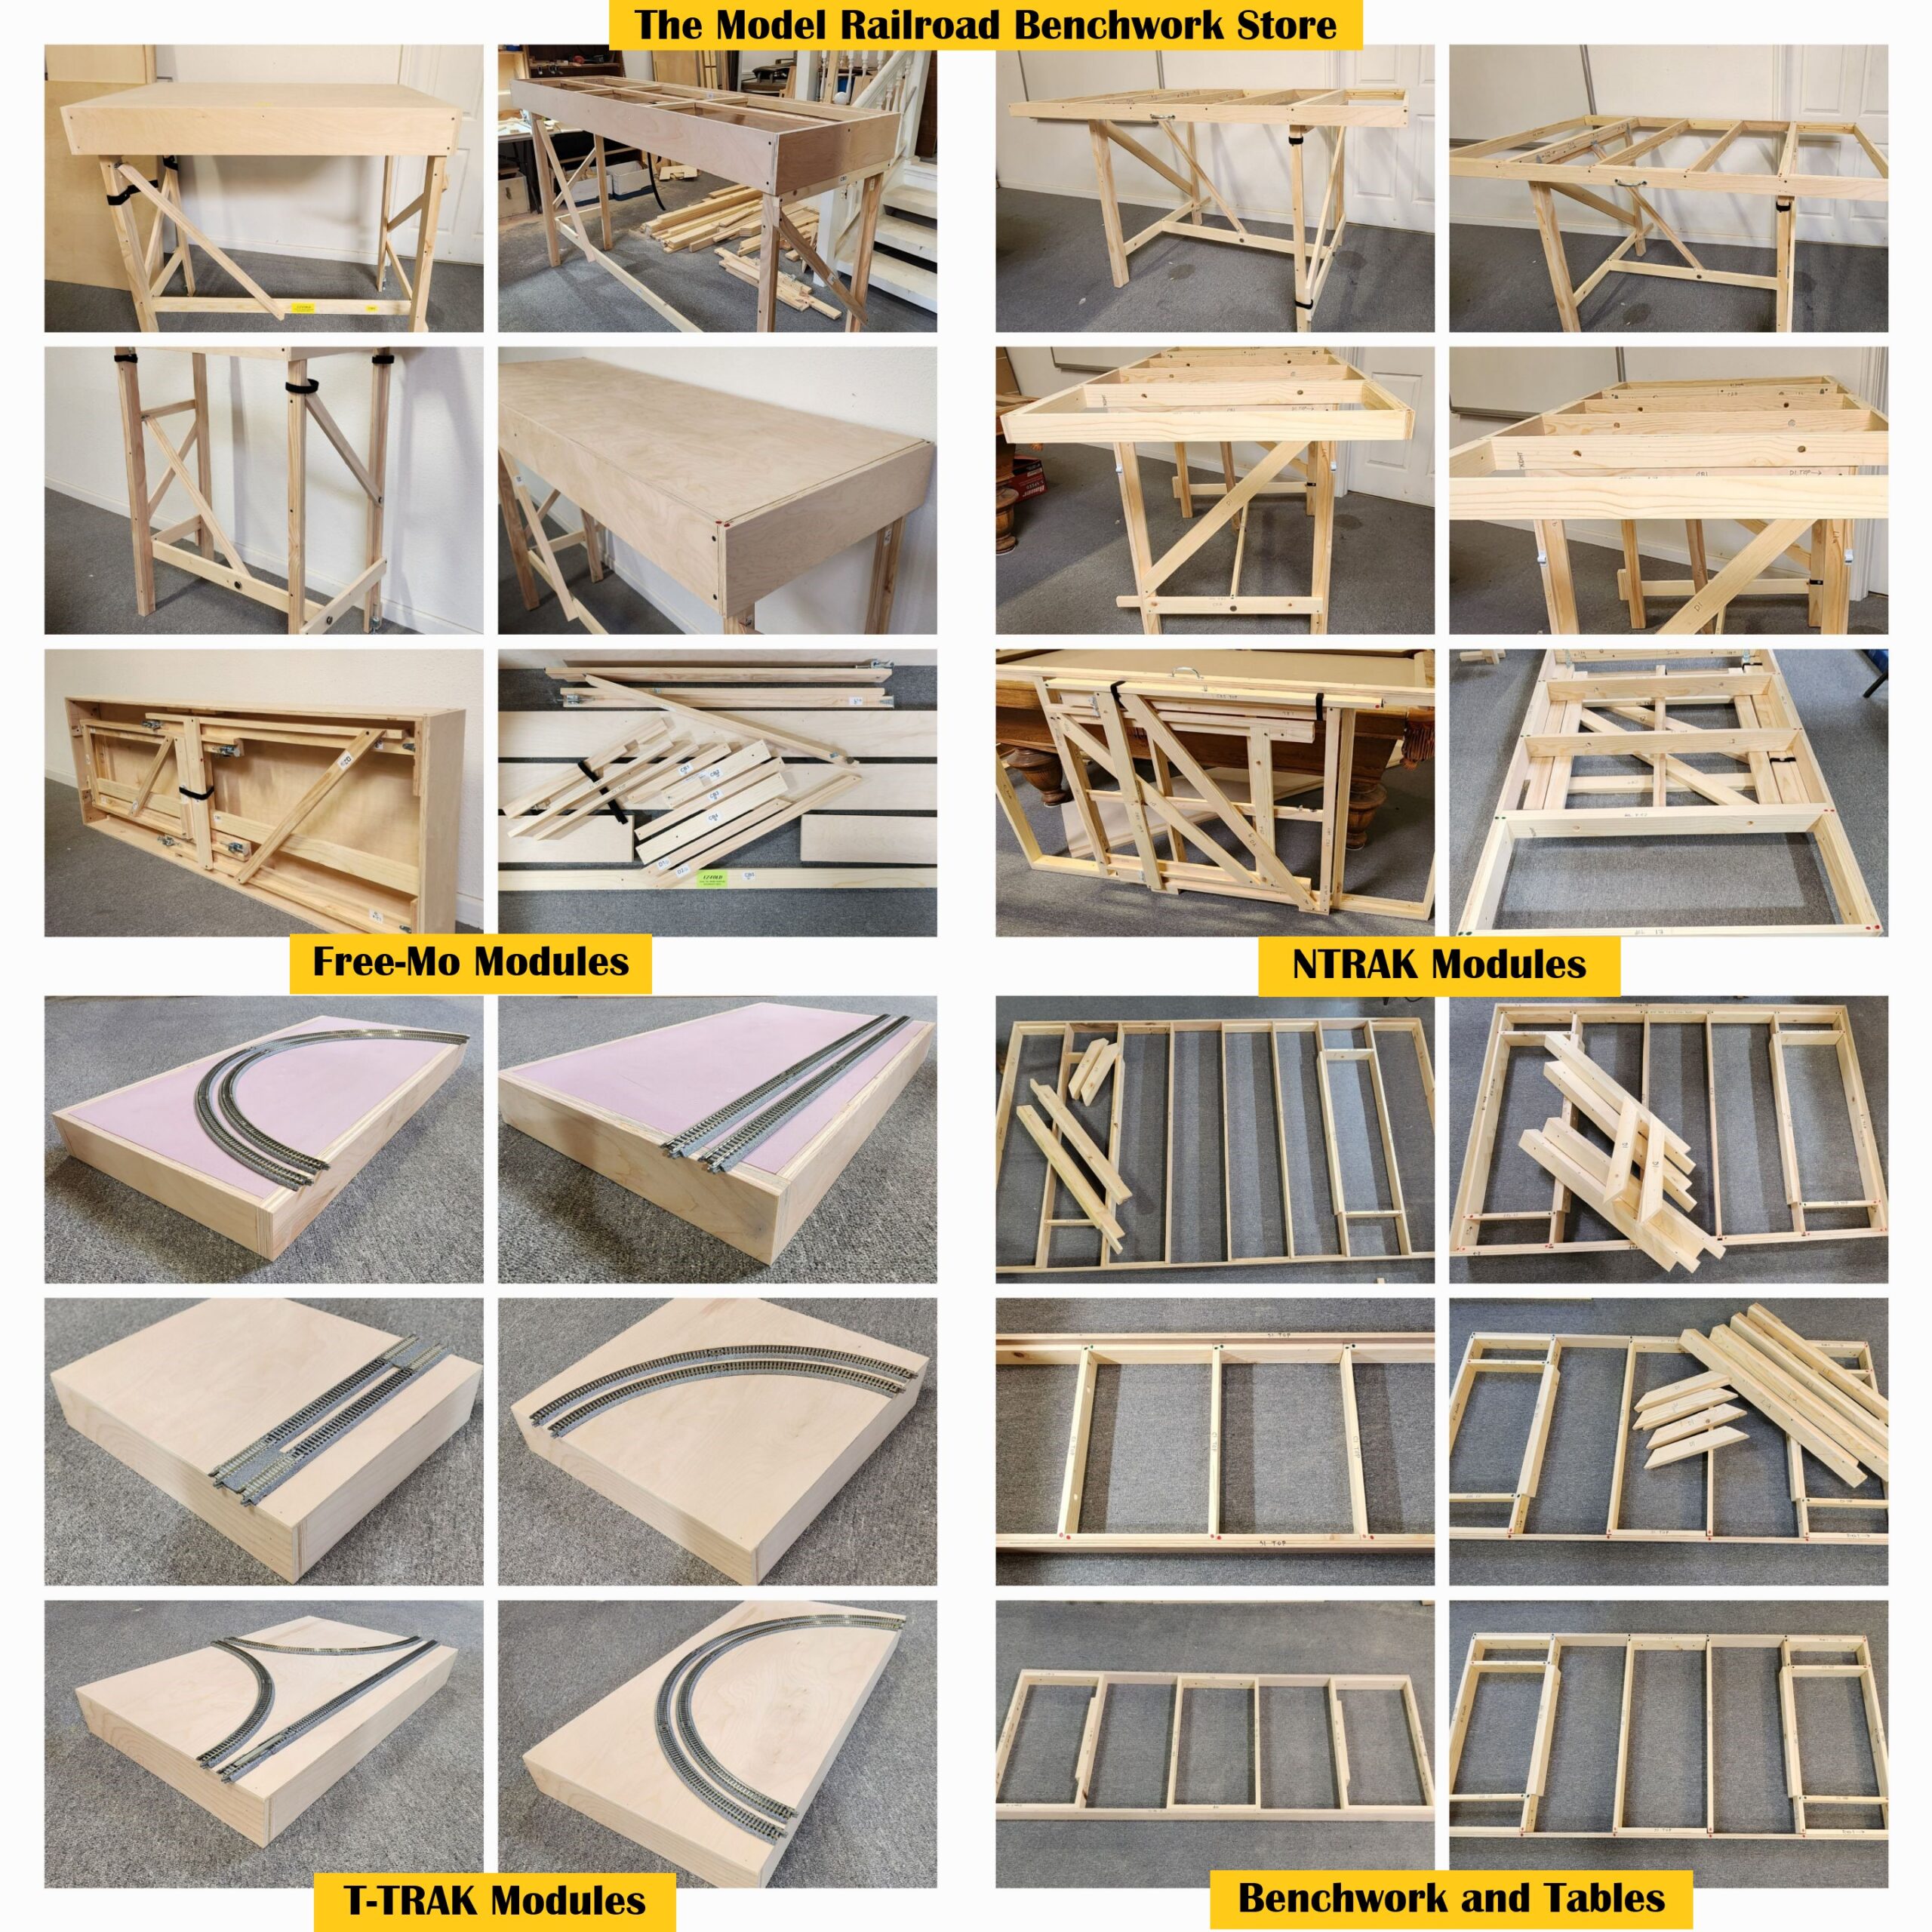 MODEL RAILROAD BENCHWORK PRODUCTS